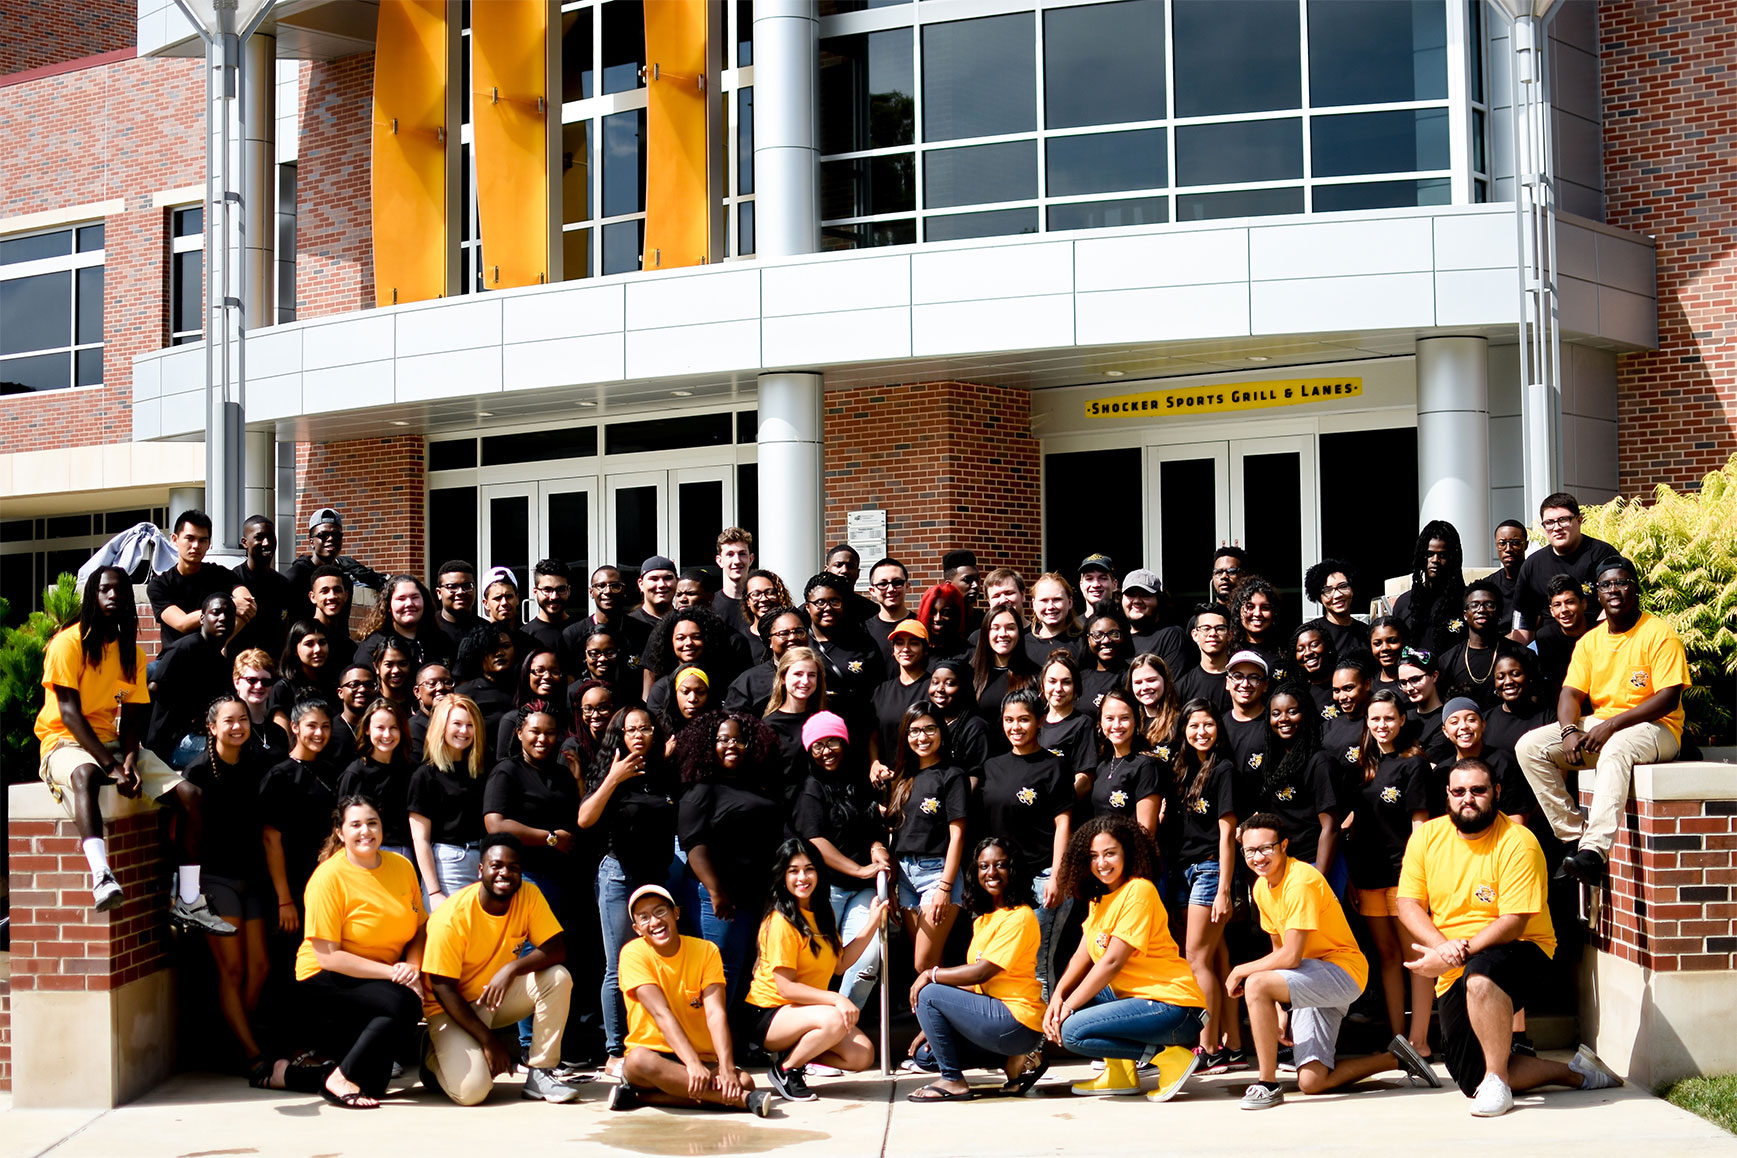 A group of students taking a picture together in front of RSC.